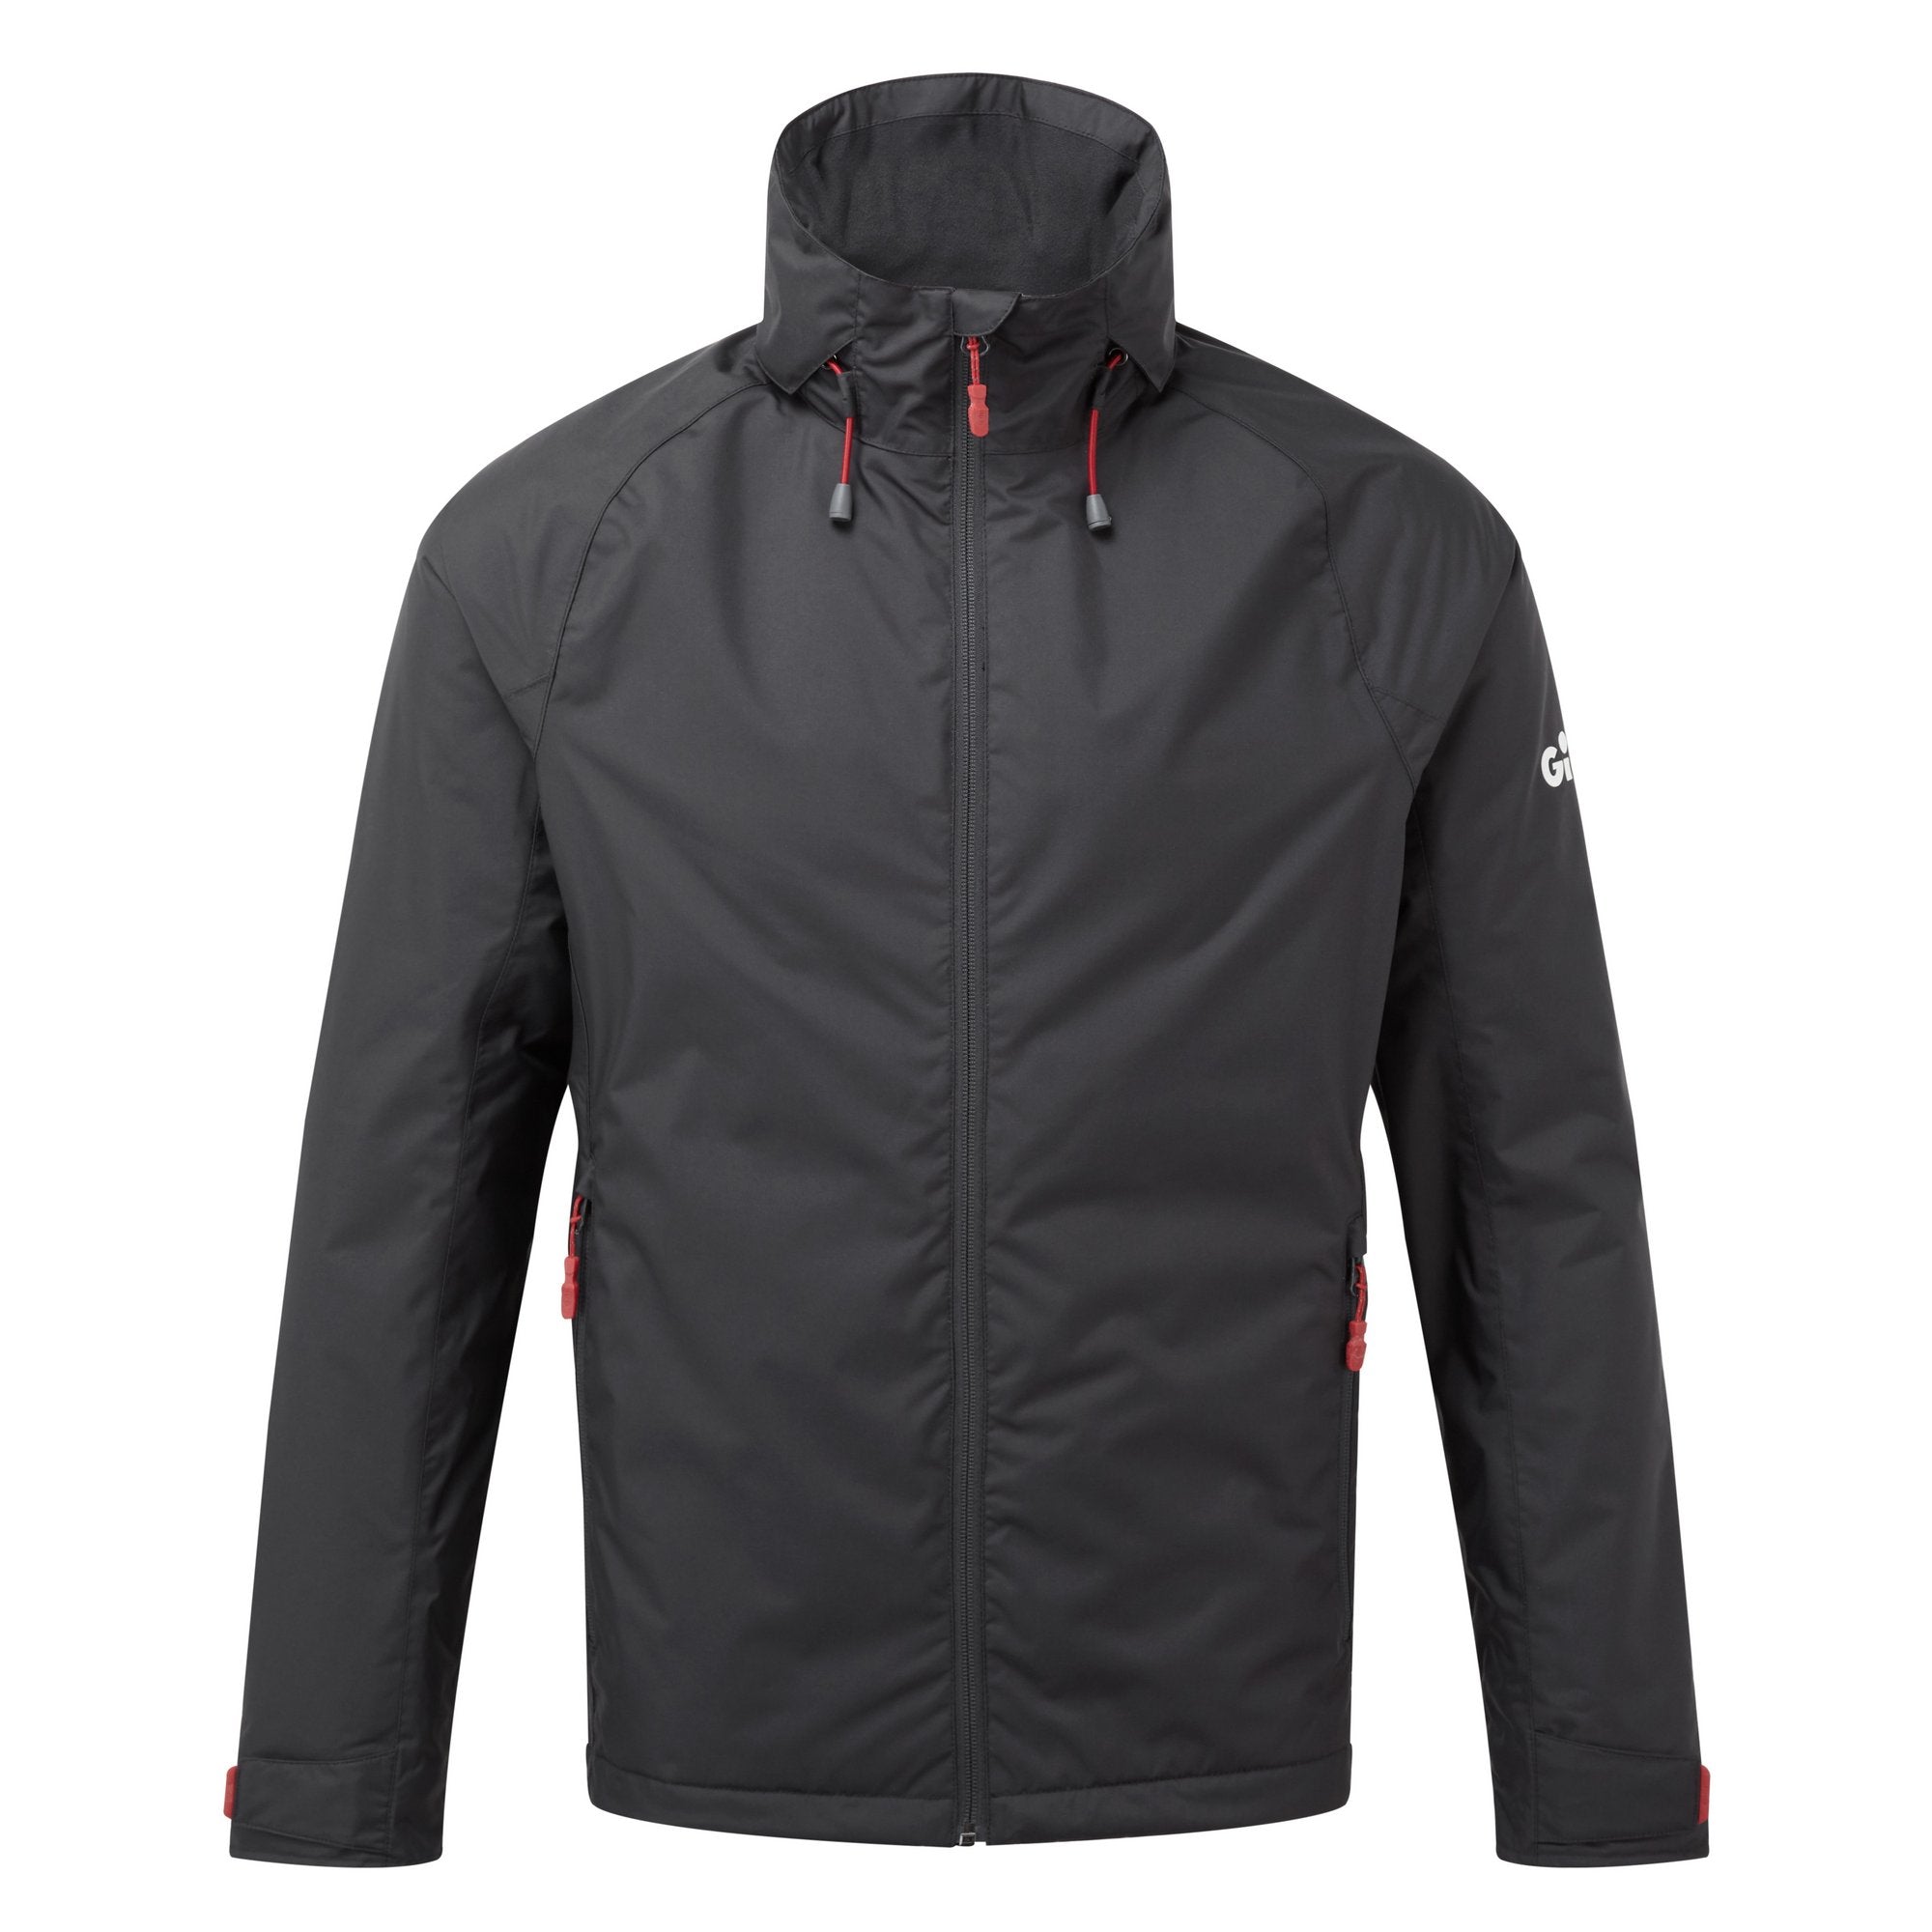 GILL Men's Hooded Insulated Jacket